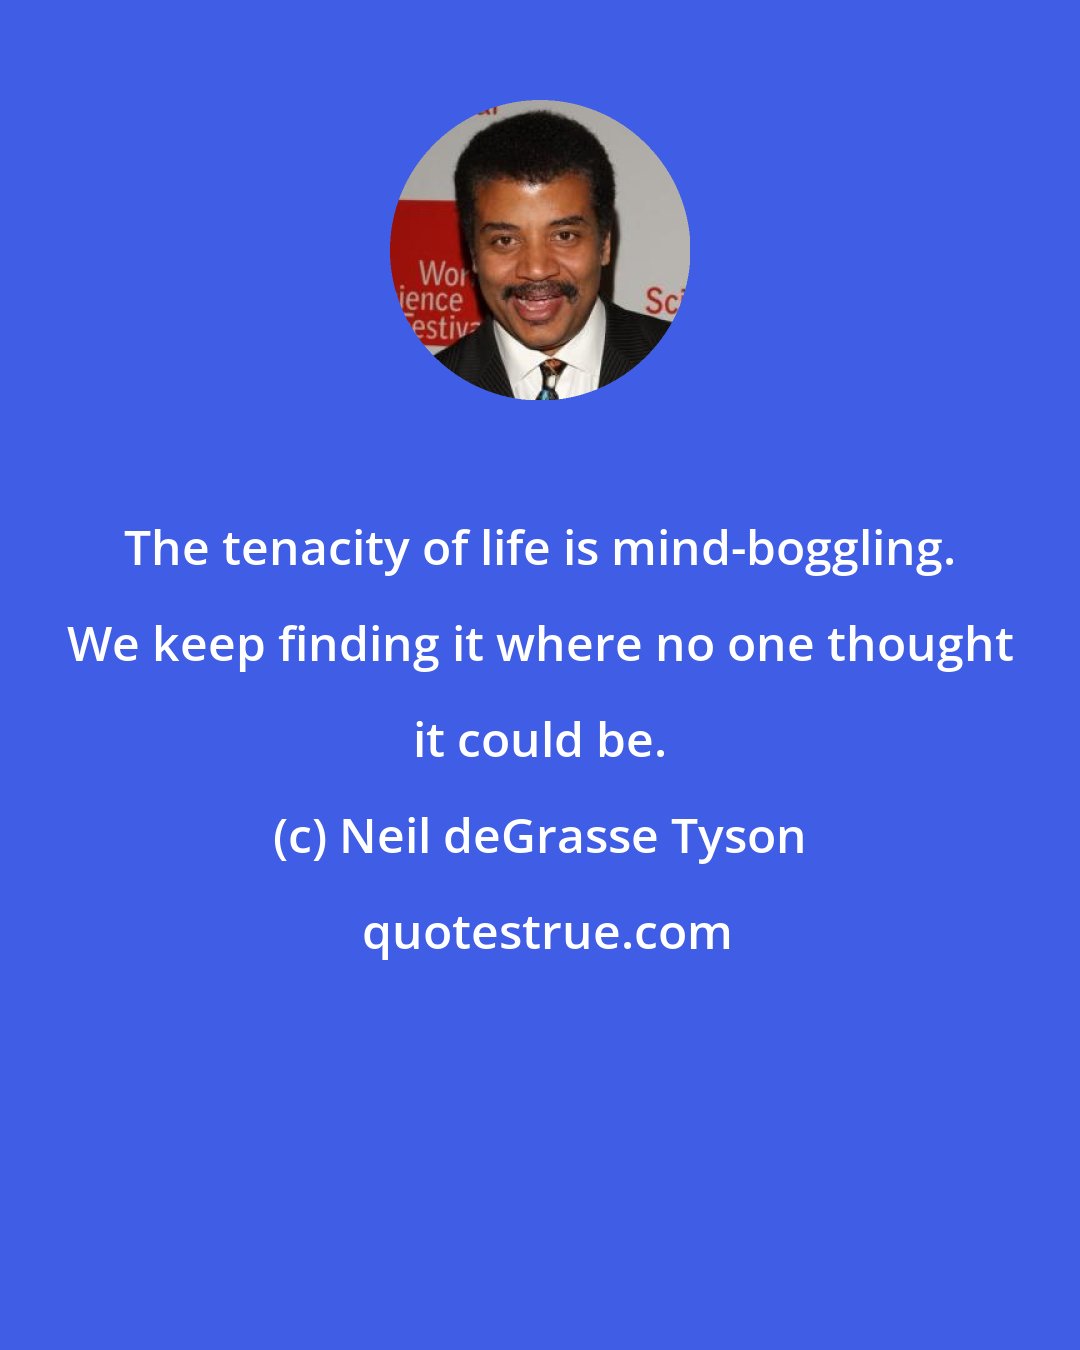 Neil deGrasse Tyson: The tenacity of life is mind-boggling. We keep finding it where no one thought it could be.